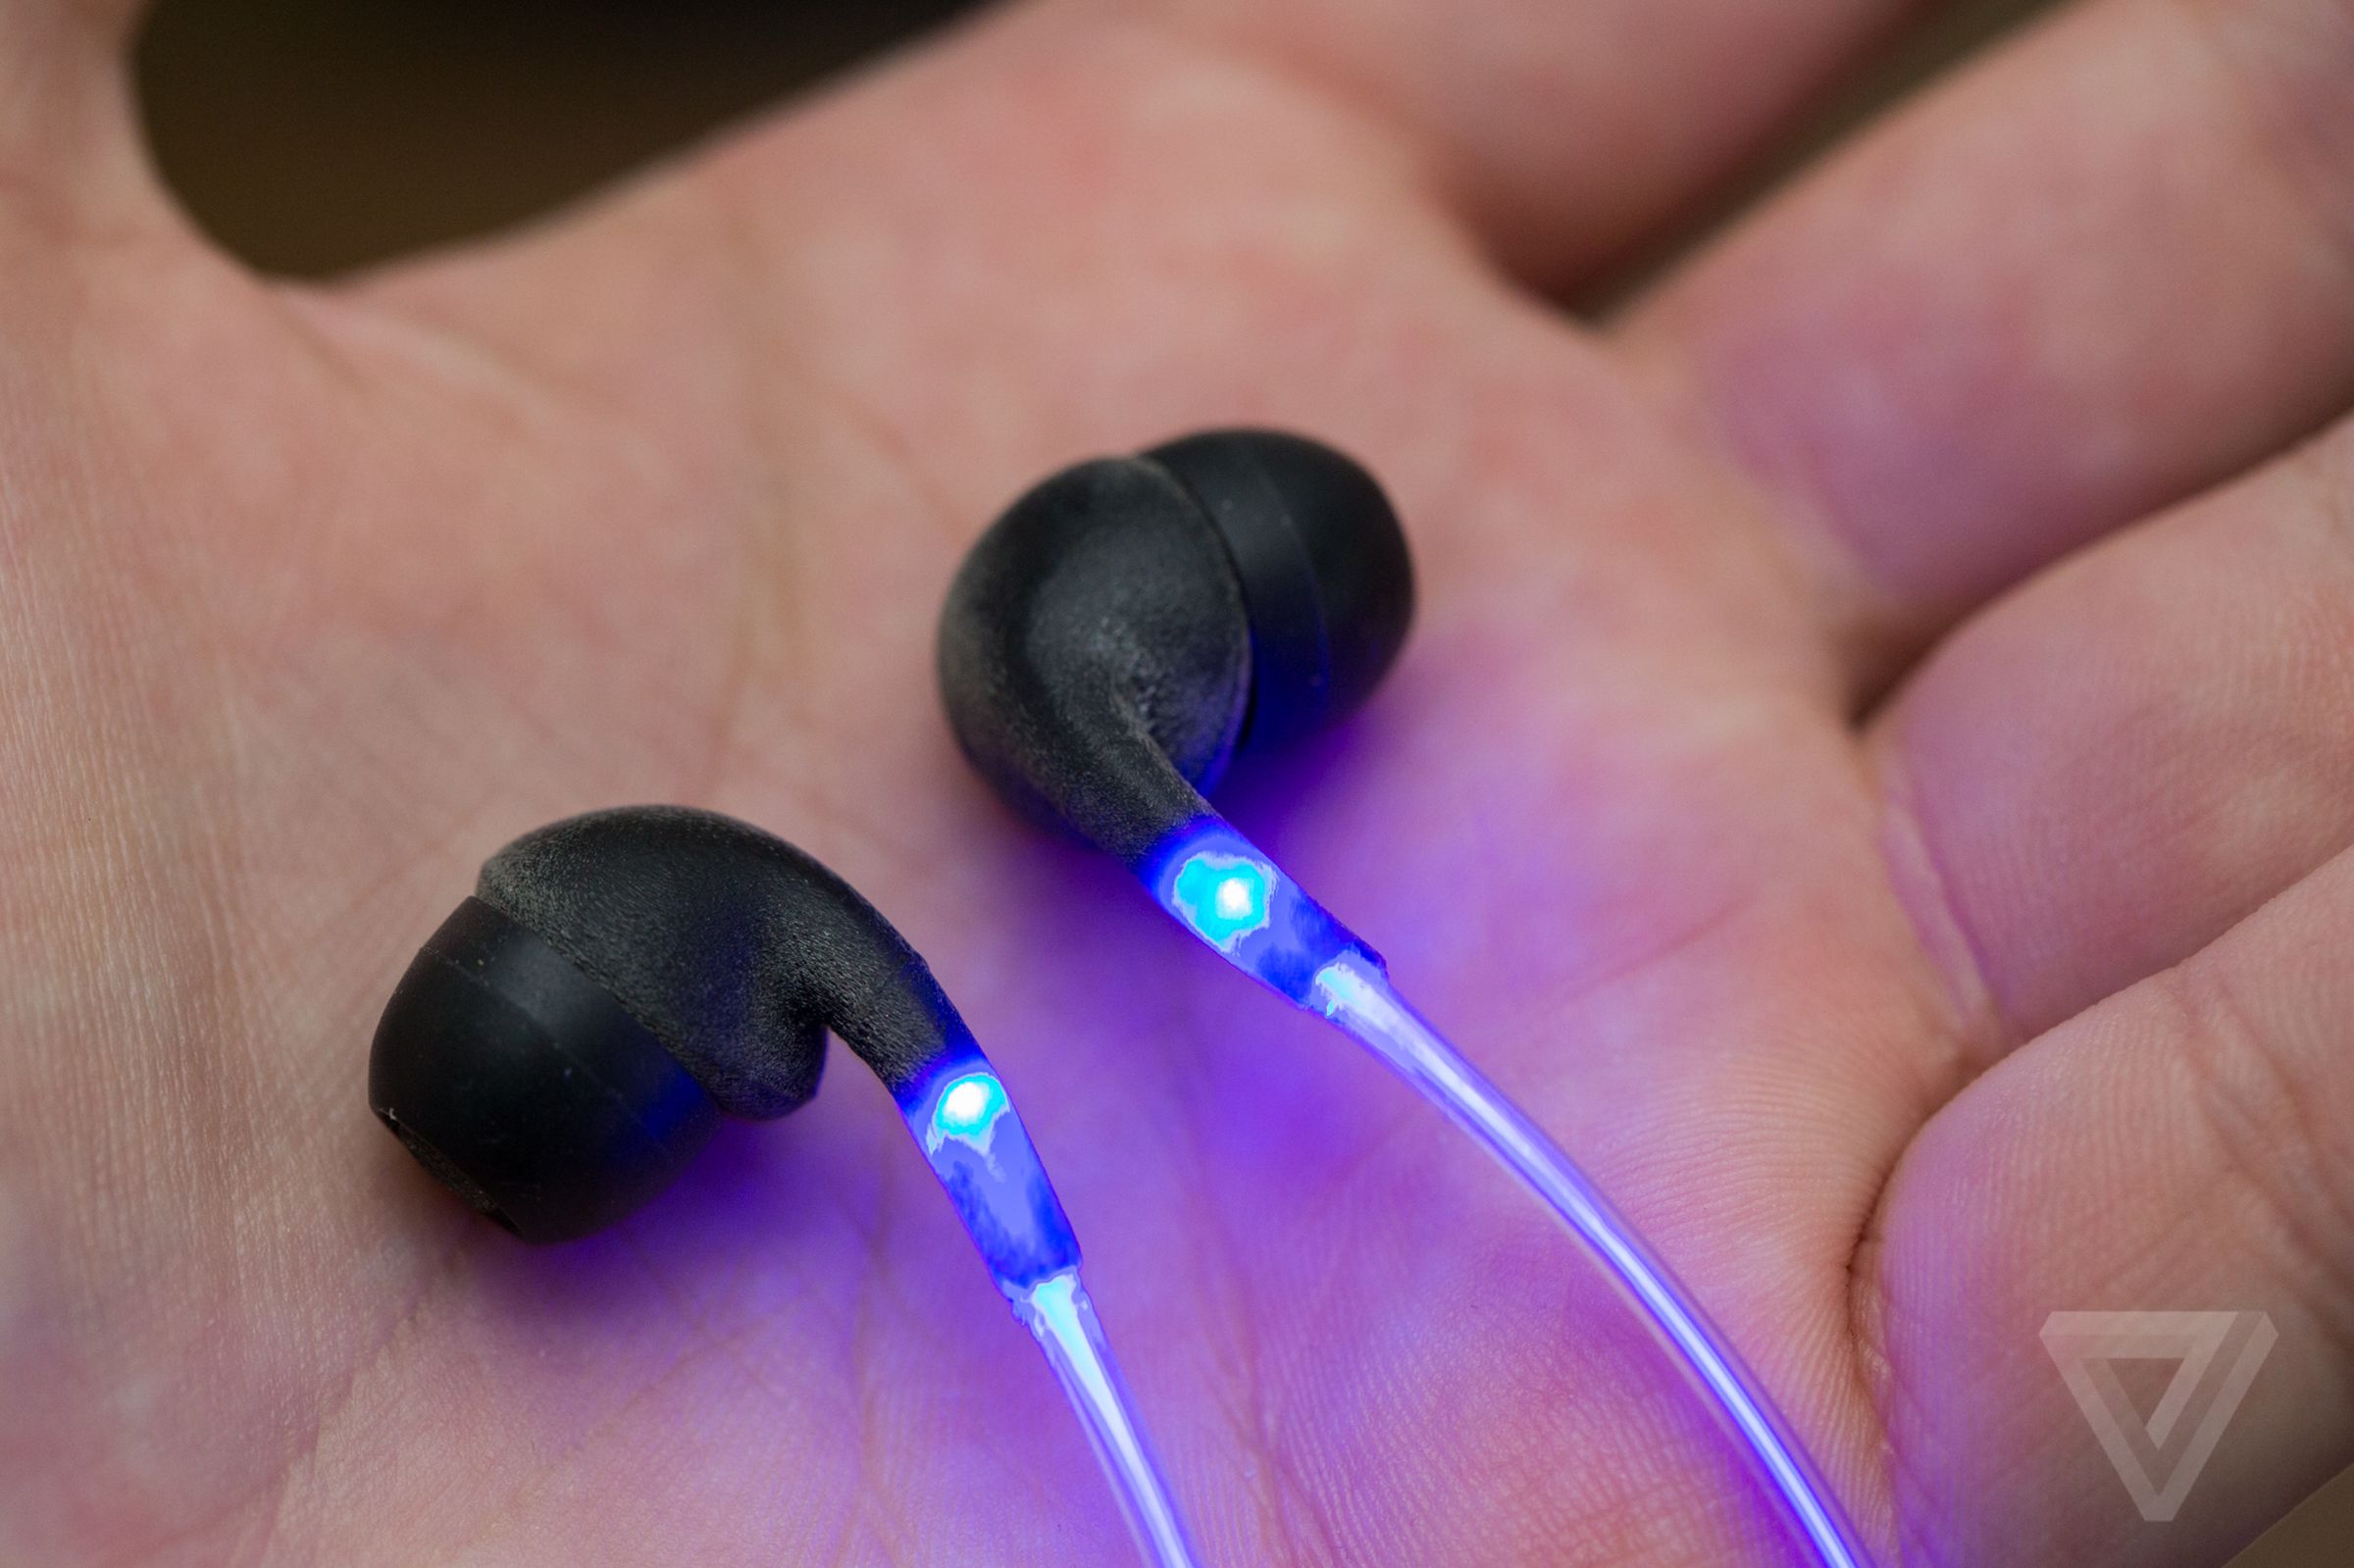 Glow earbuds in photos